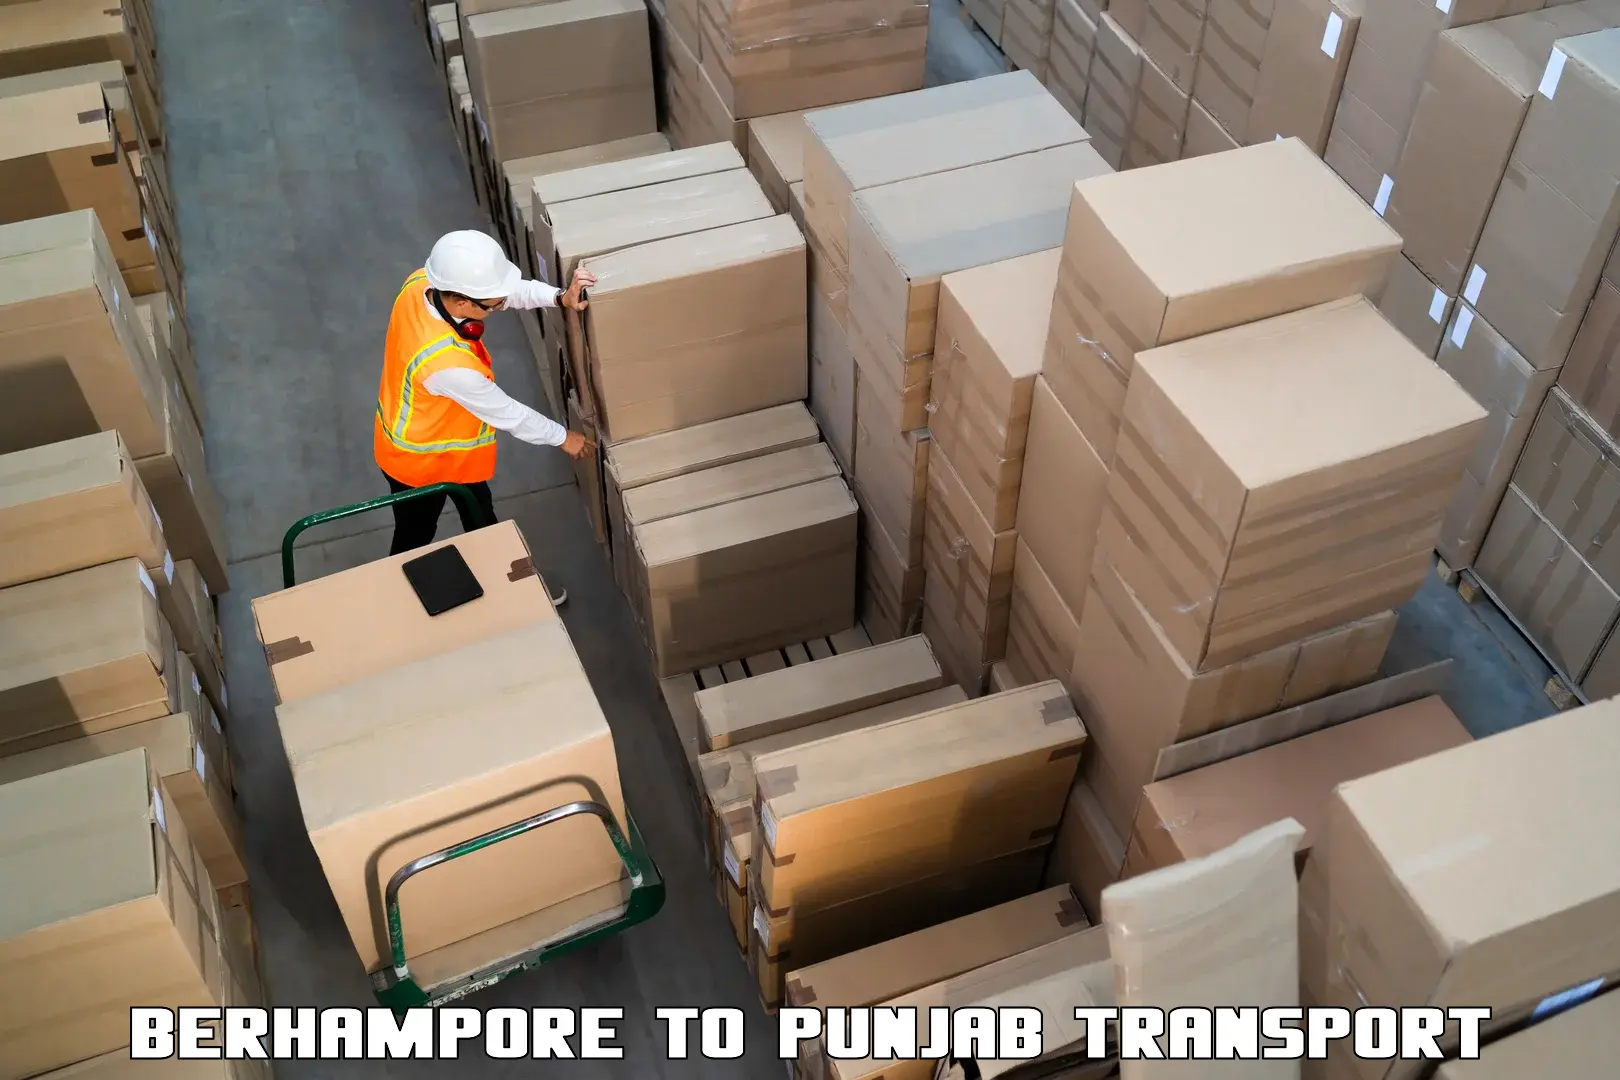 Vehicle transport services Berhampore to Bagha Purana